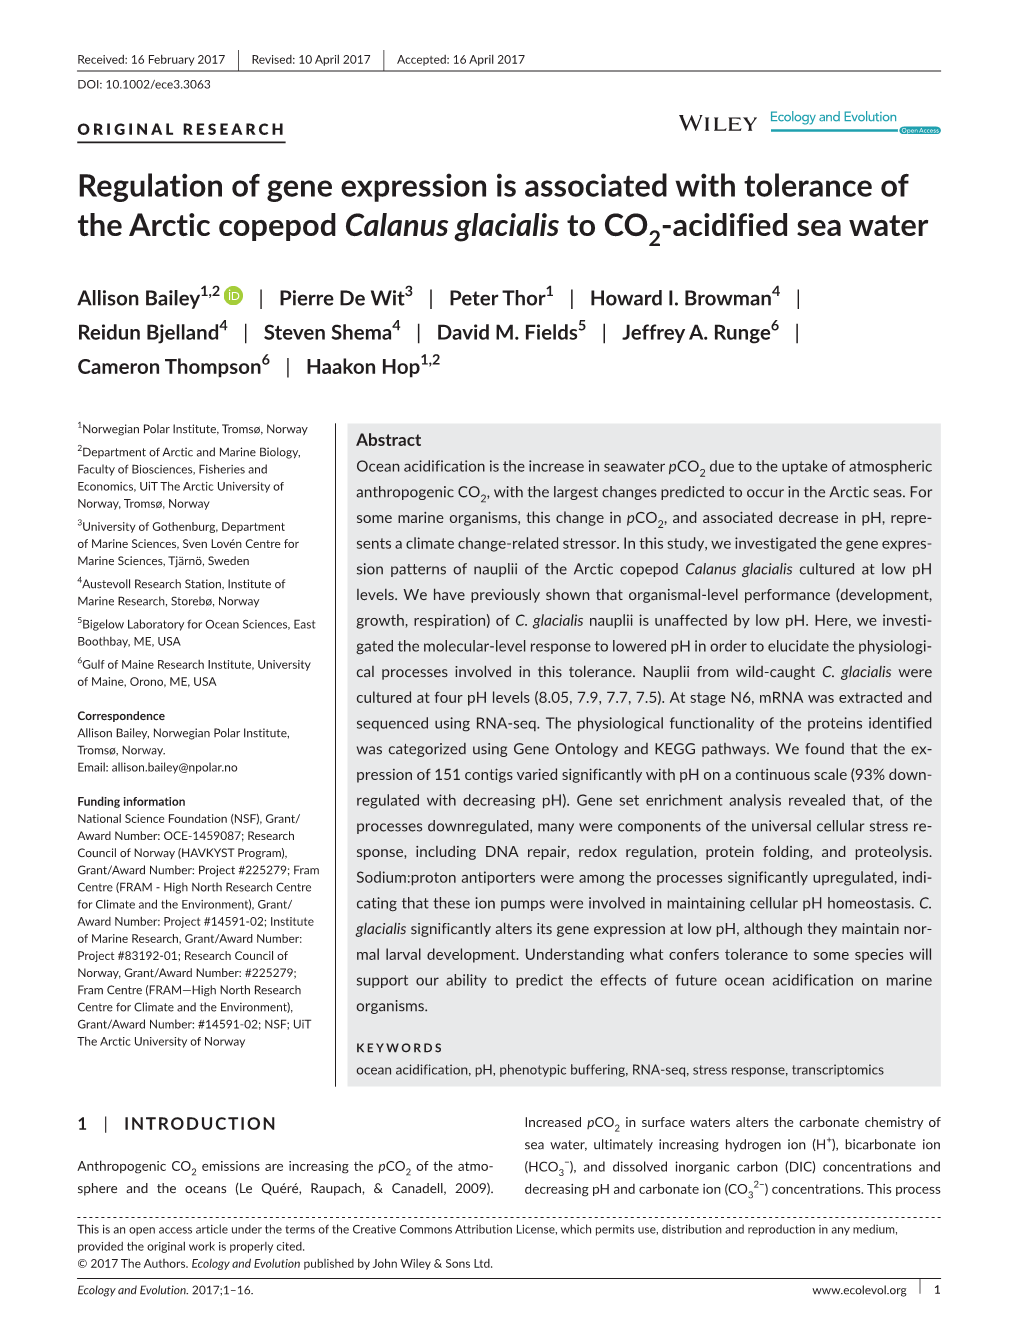 Regulation of Gene Expression Is Associated with Tolerance of the Arctic Copepod Calanus Glacialis to CO2&#X2010;Acidified S